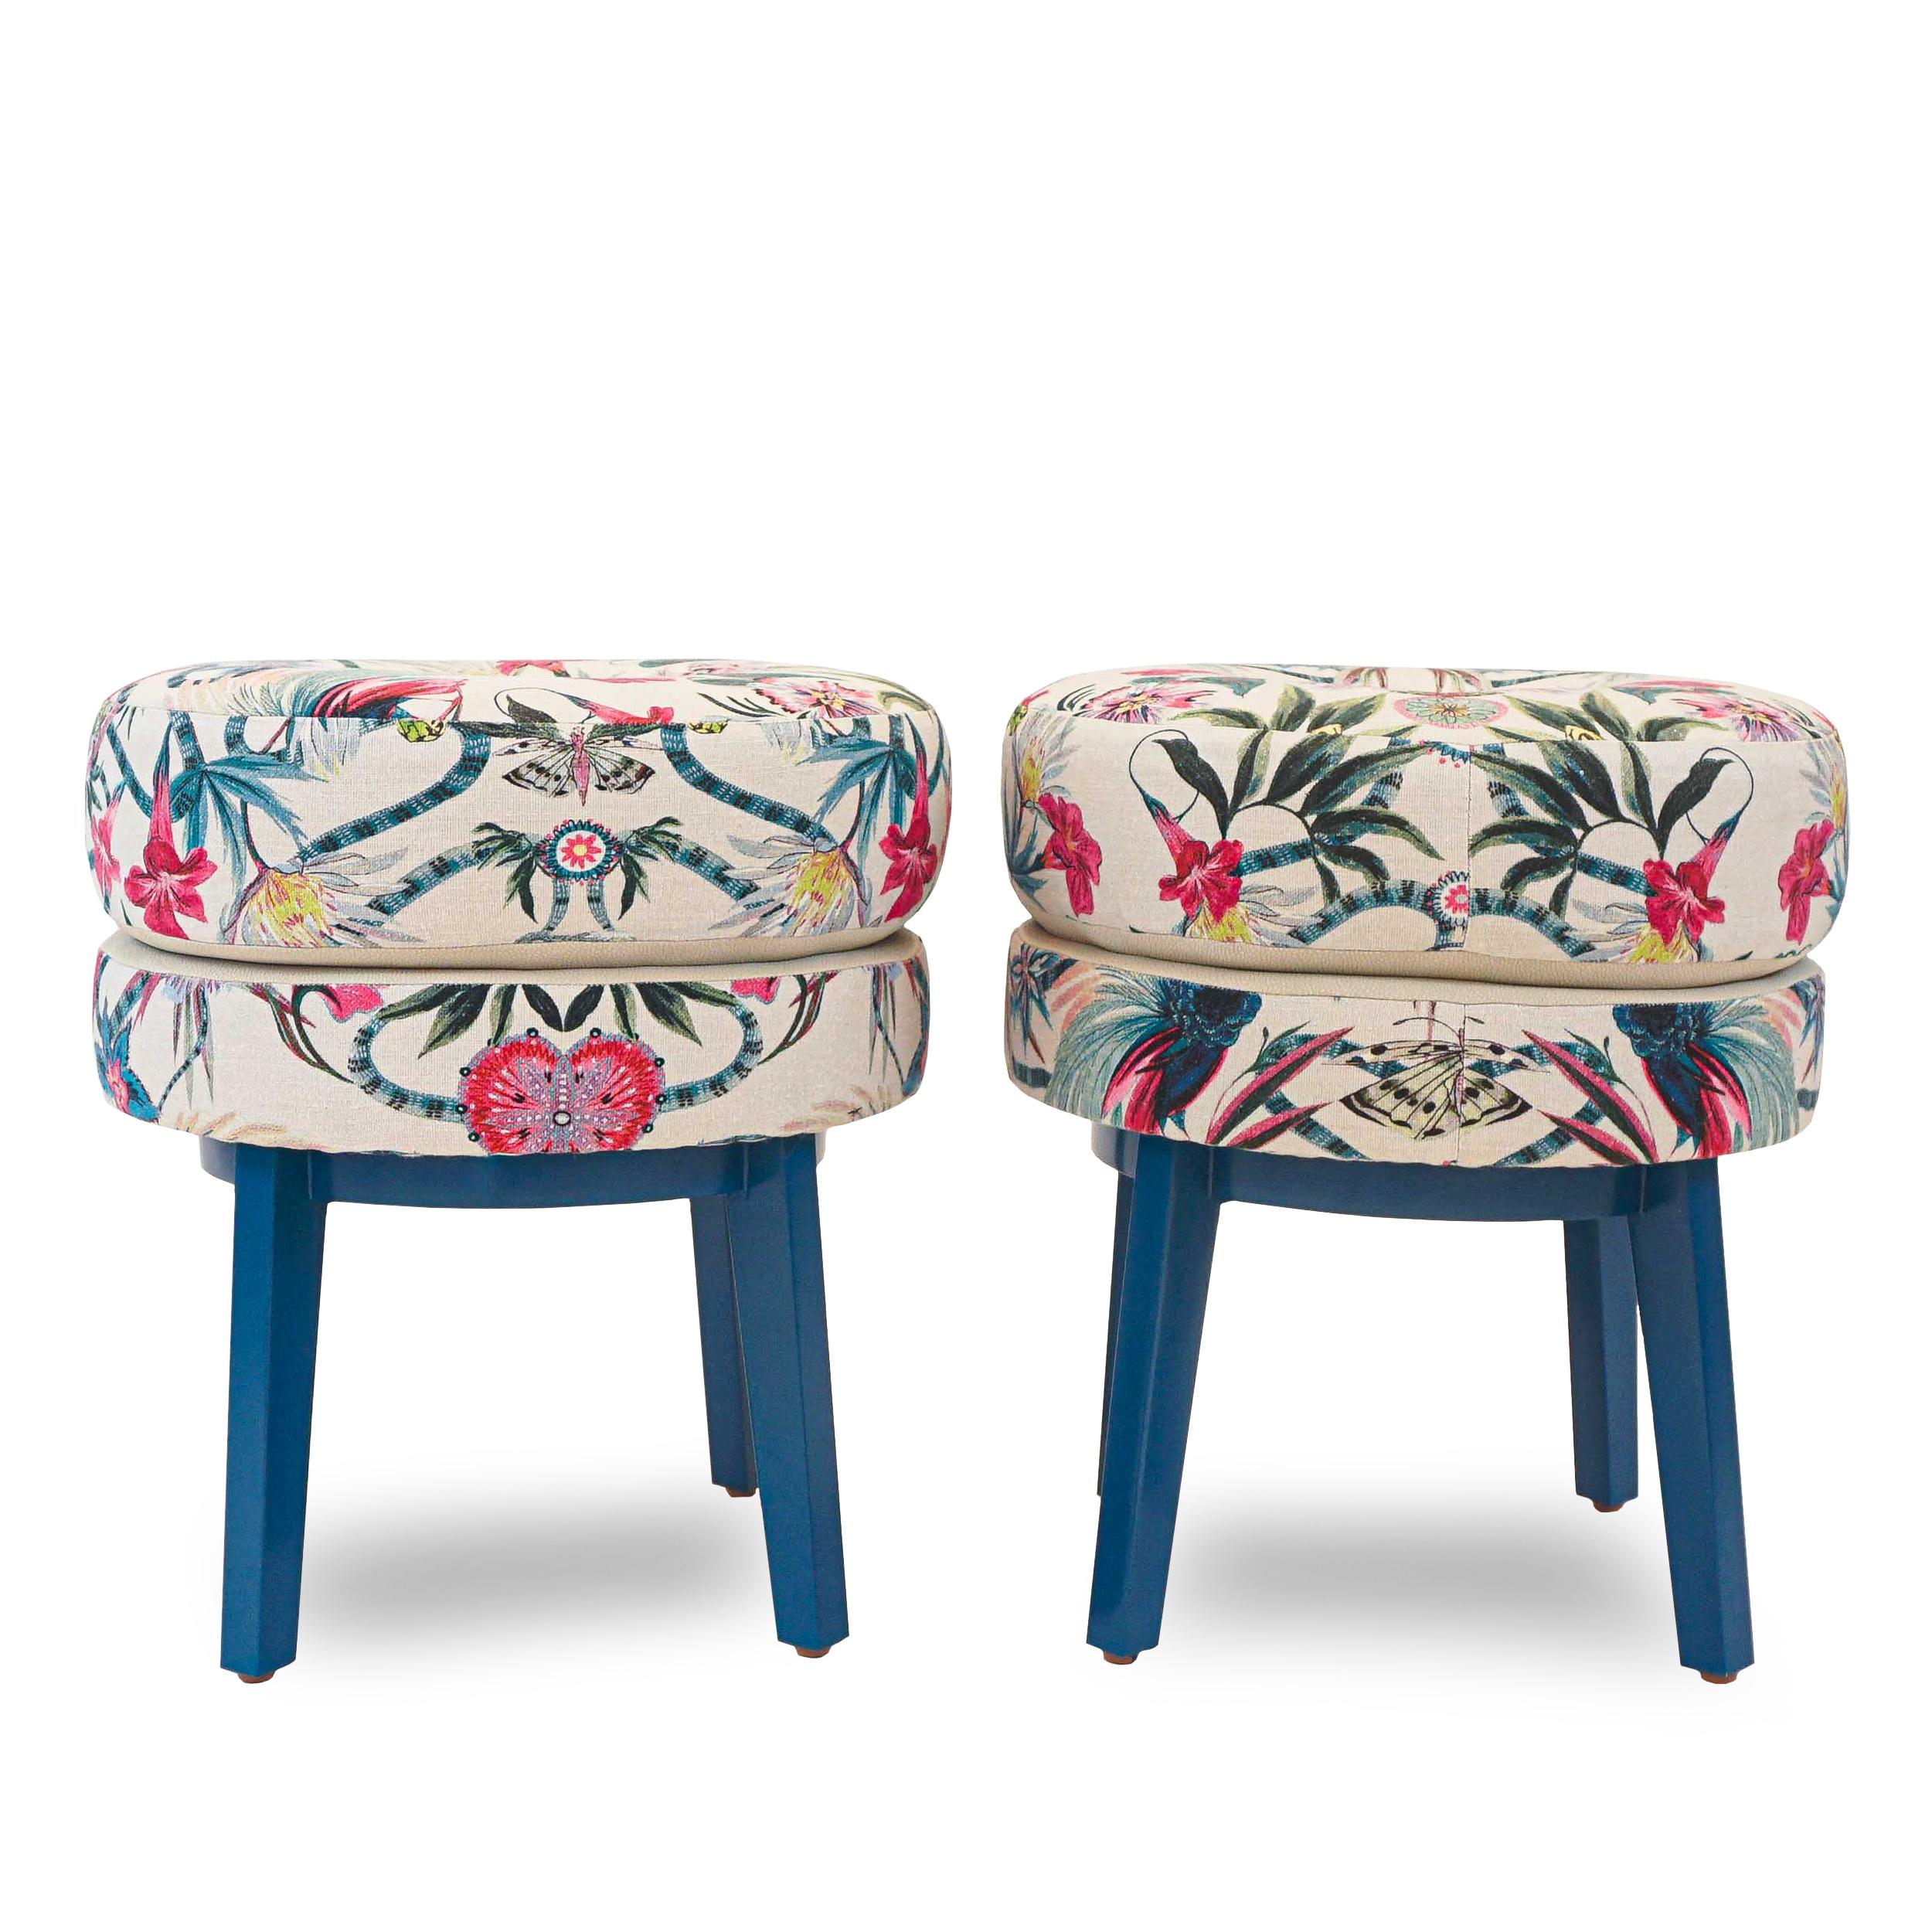 Maple Floral Print Small Round Stool For Sale